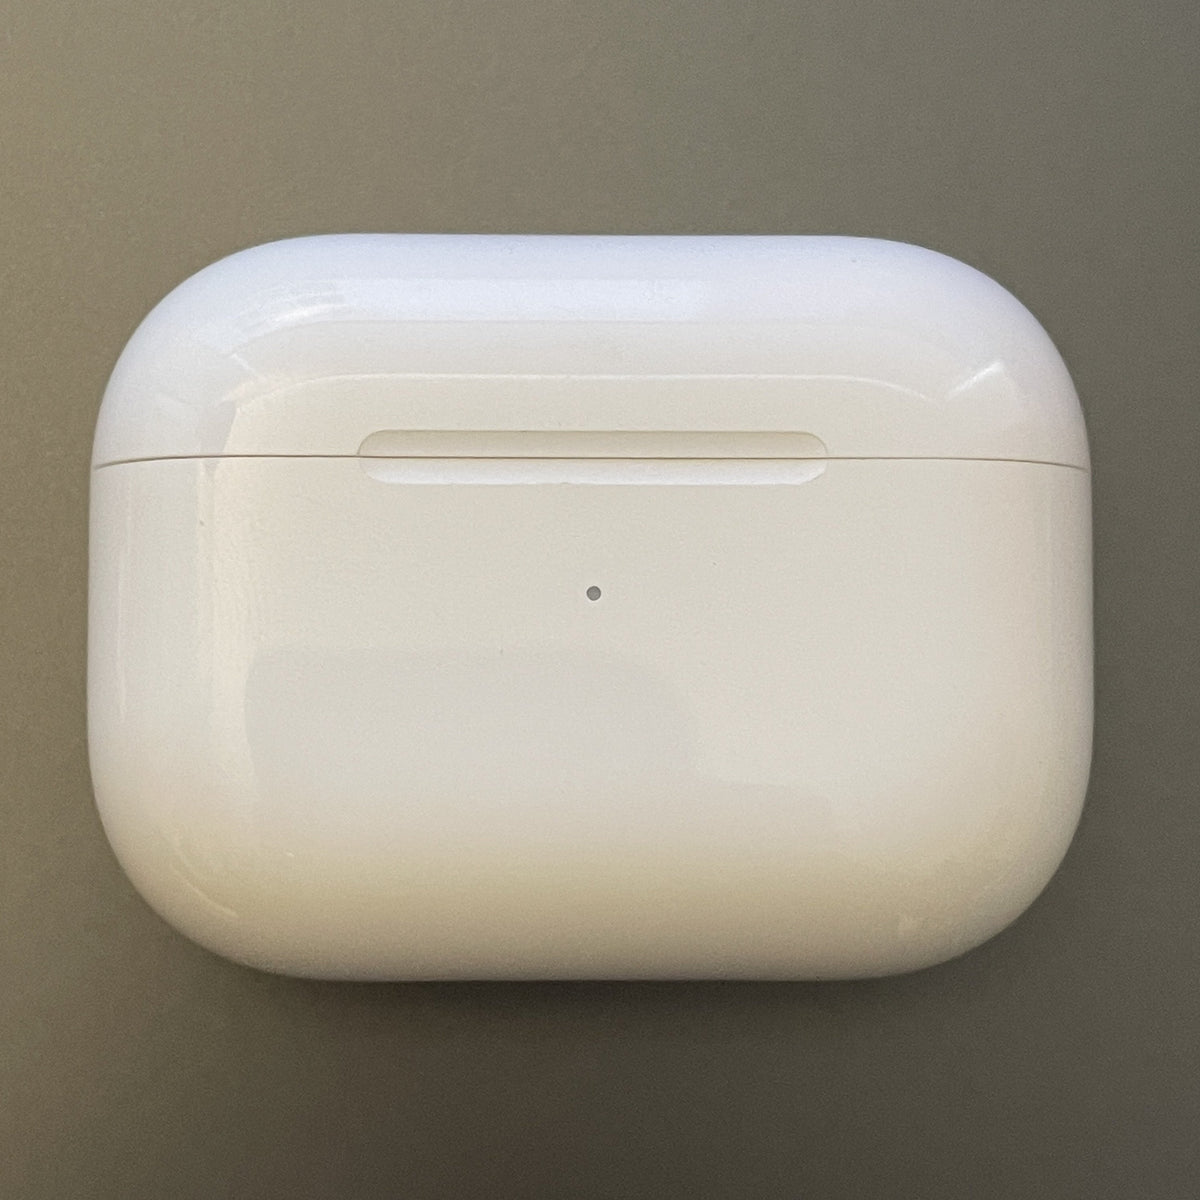 AirPods Pro Charging Case Replacement - 1st Generation (A2190)